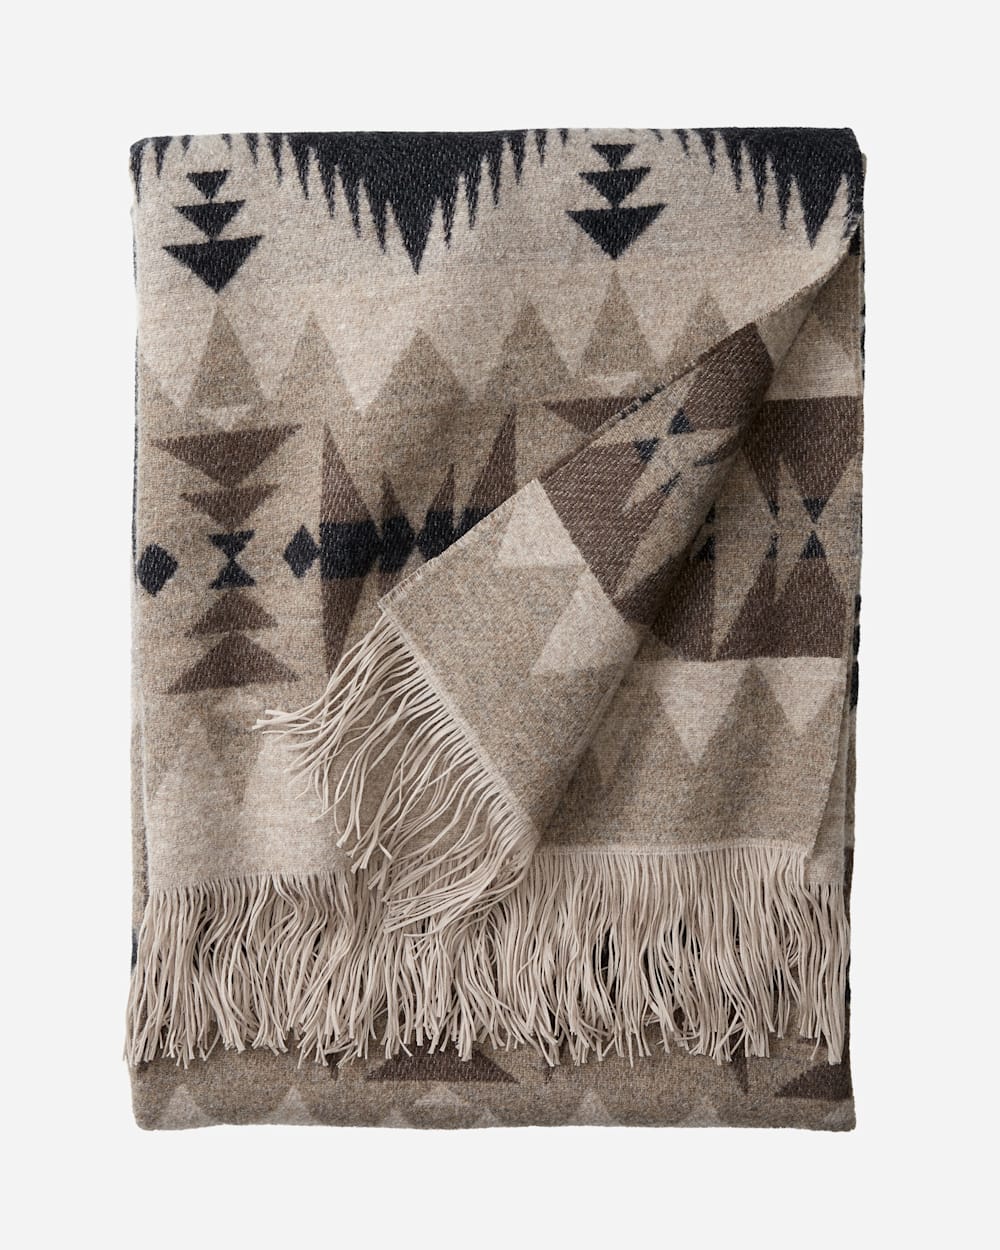 ALTERNATE VIEW OF SONORA FRINGED THROW IN TAN image number 3